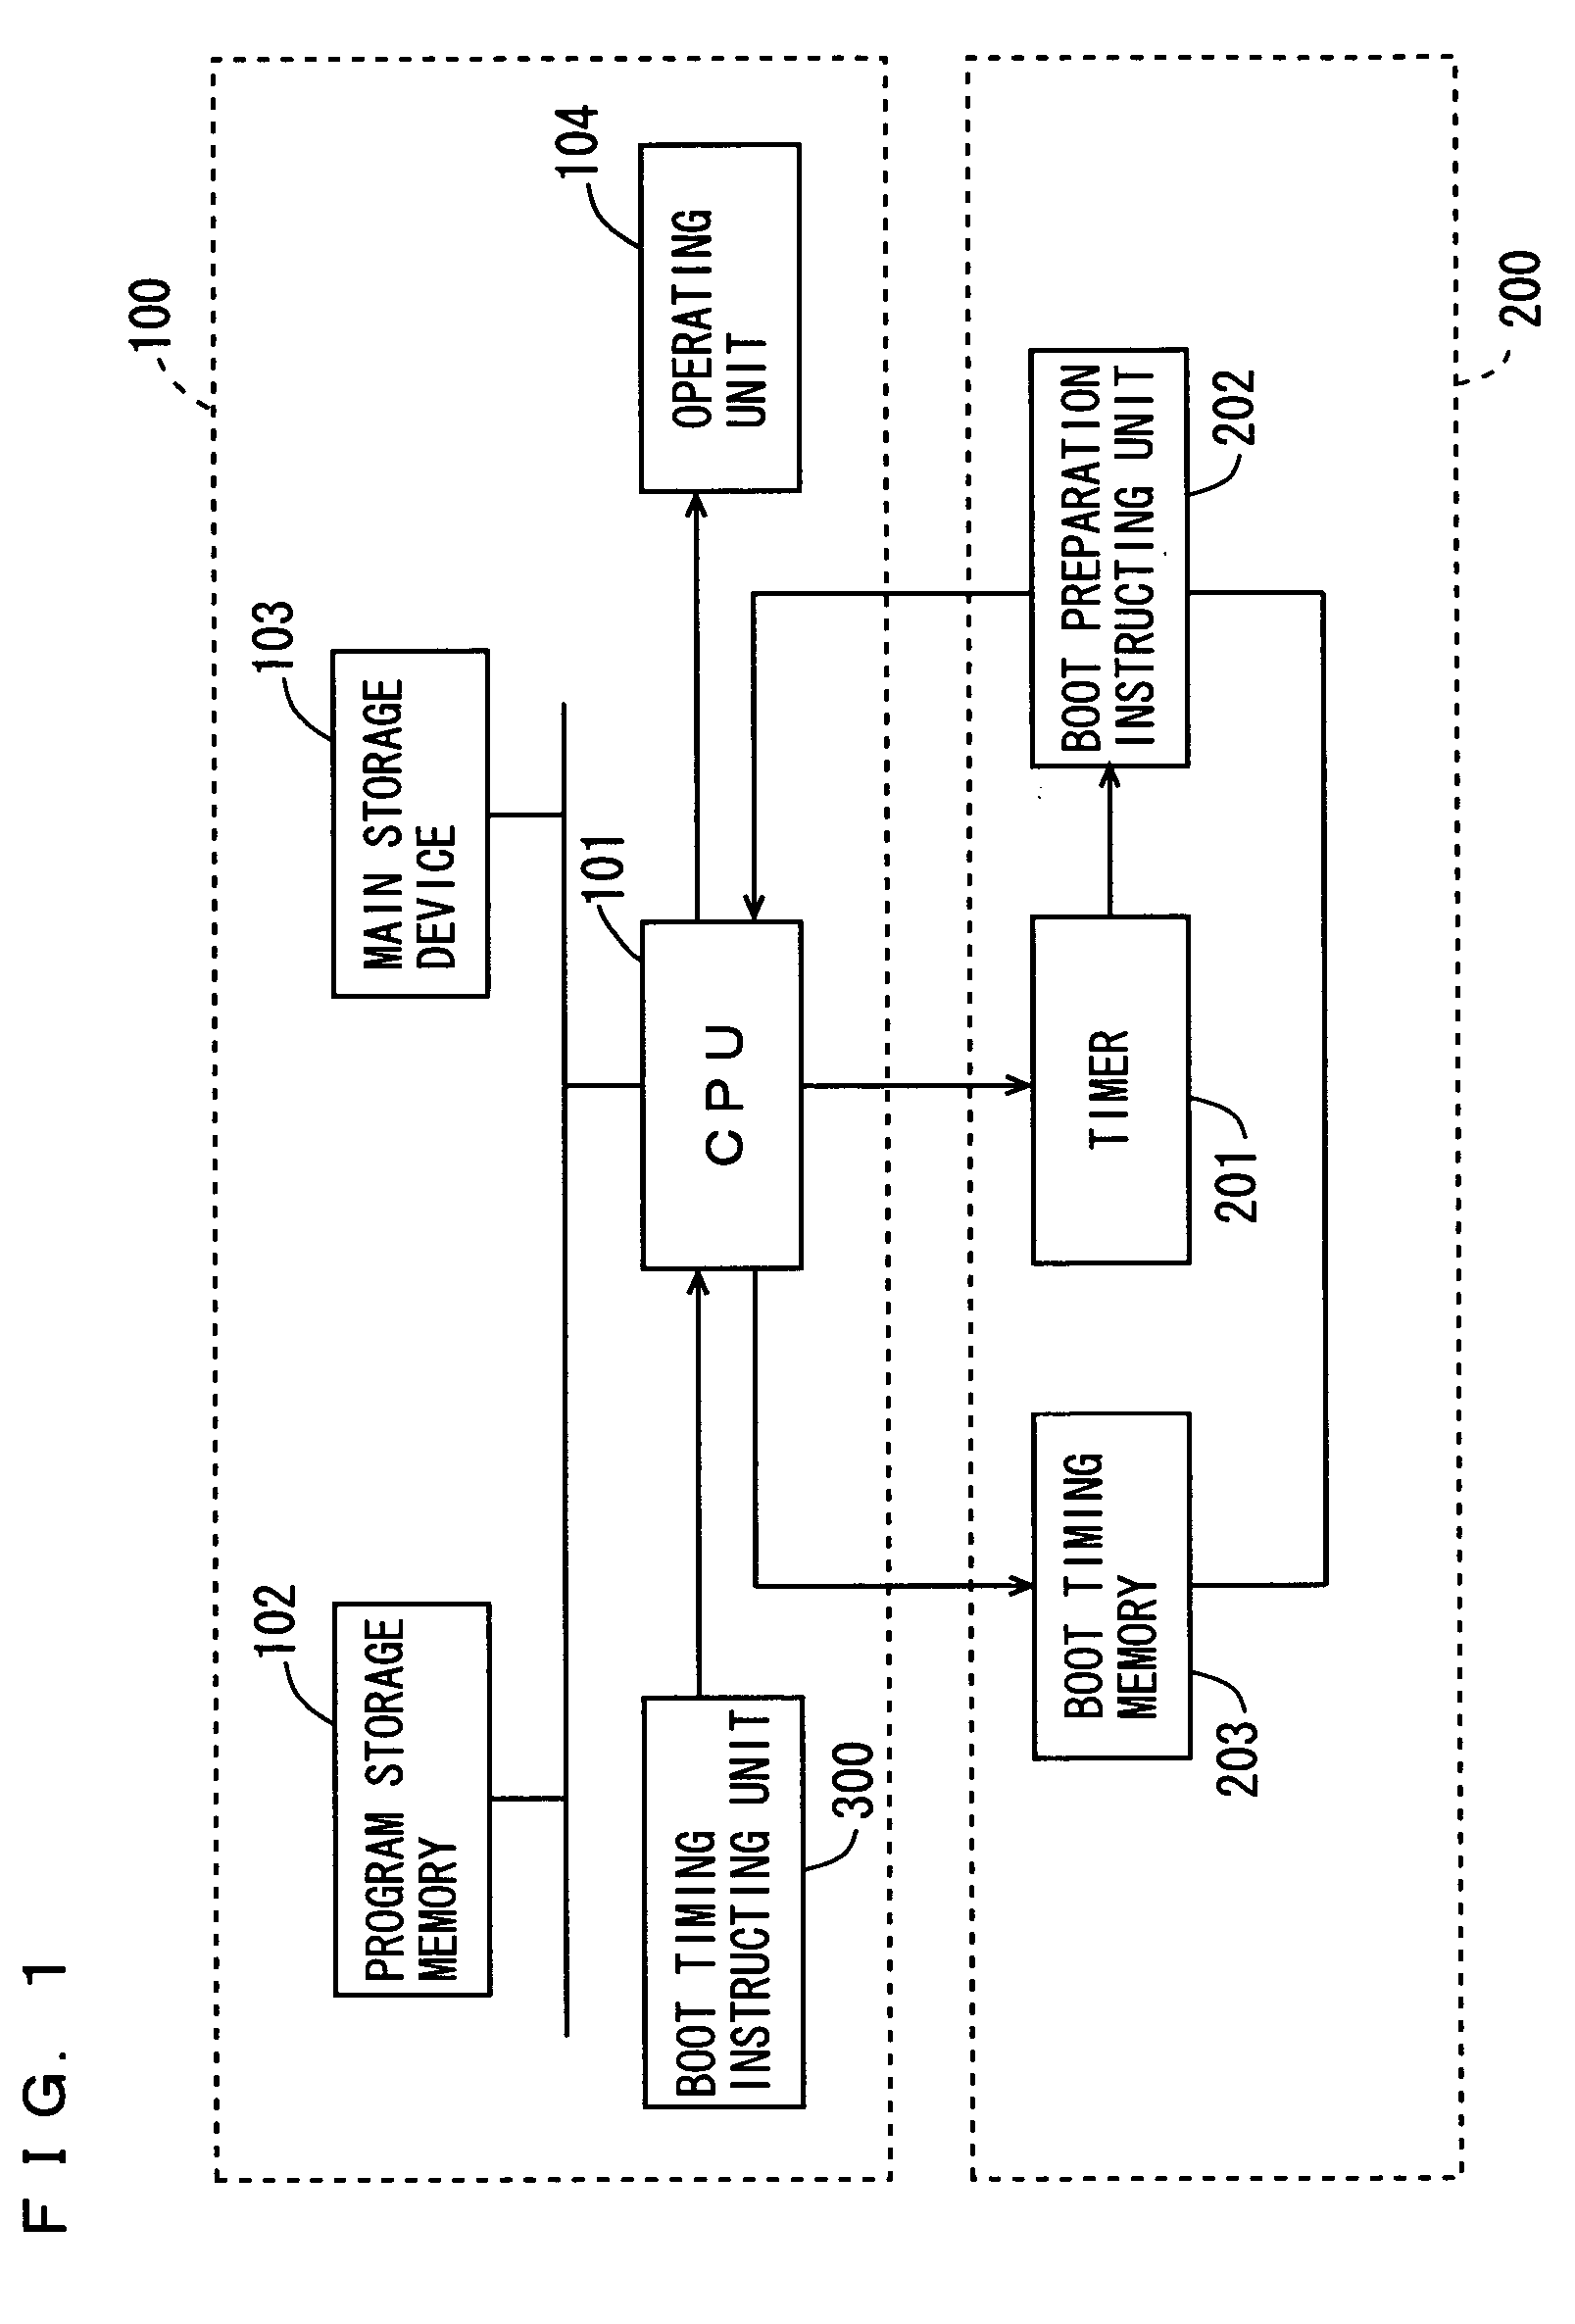 Start time reduction device and electronic device